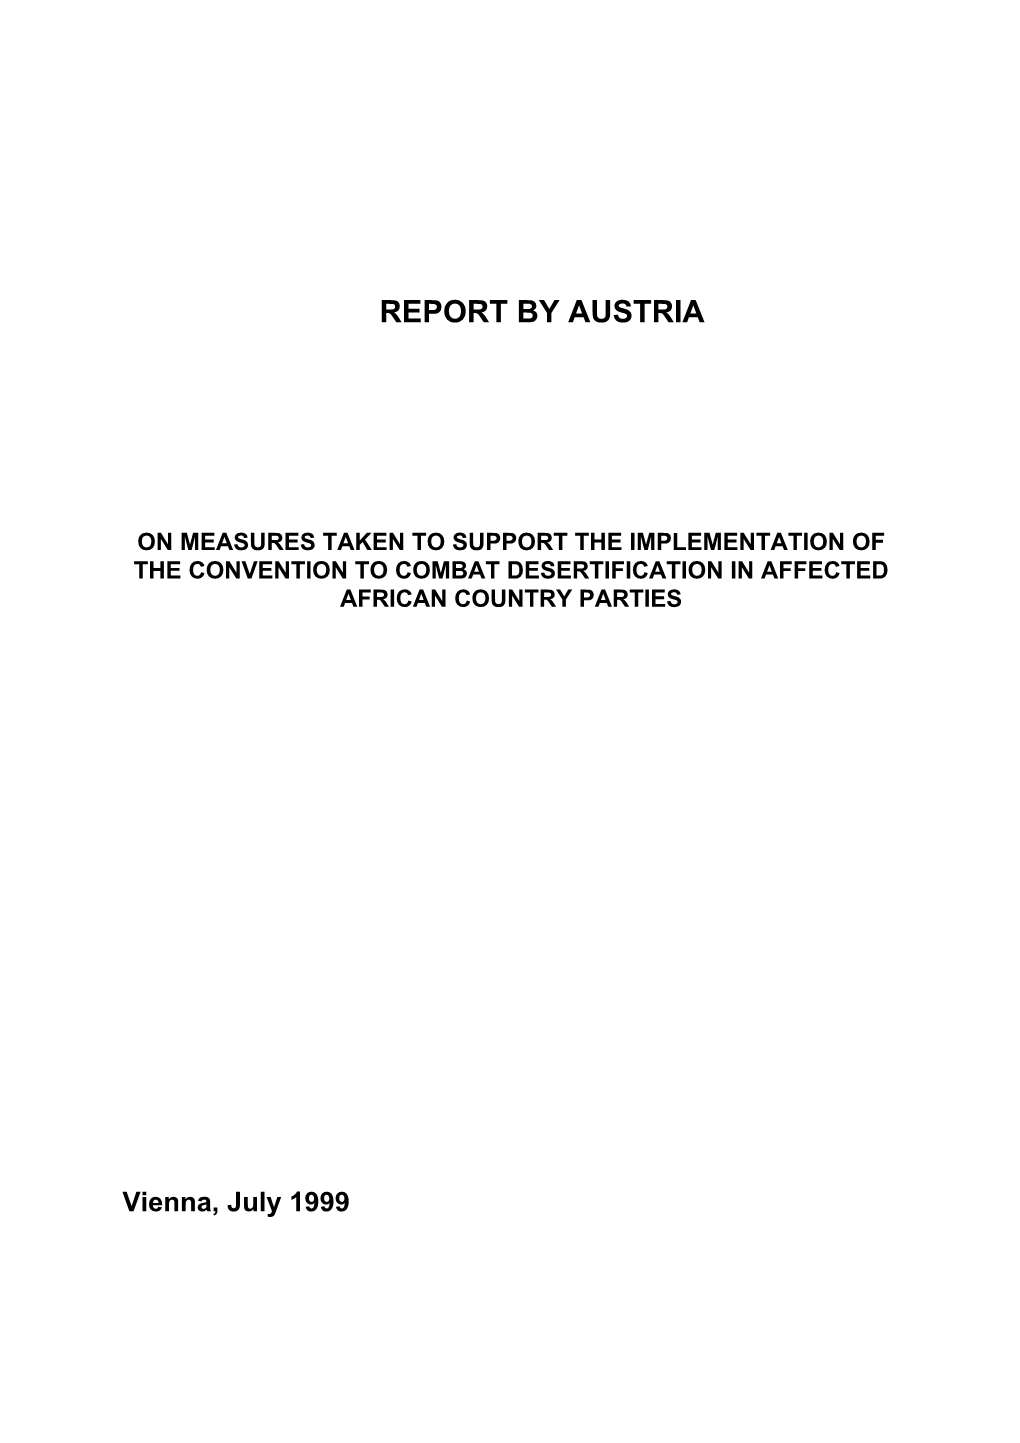 Report by Austria